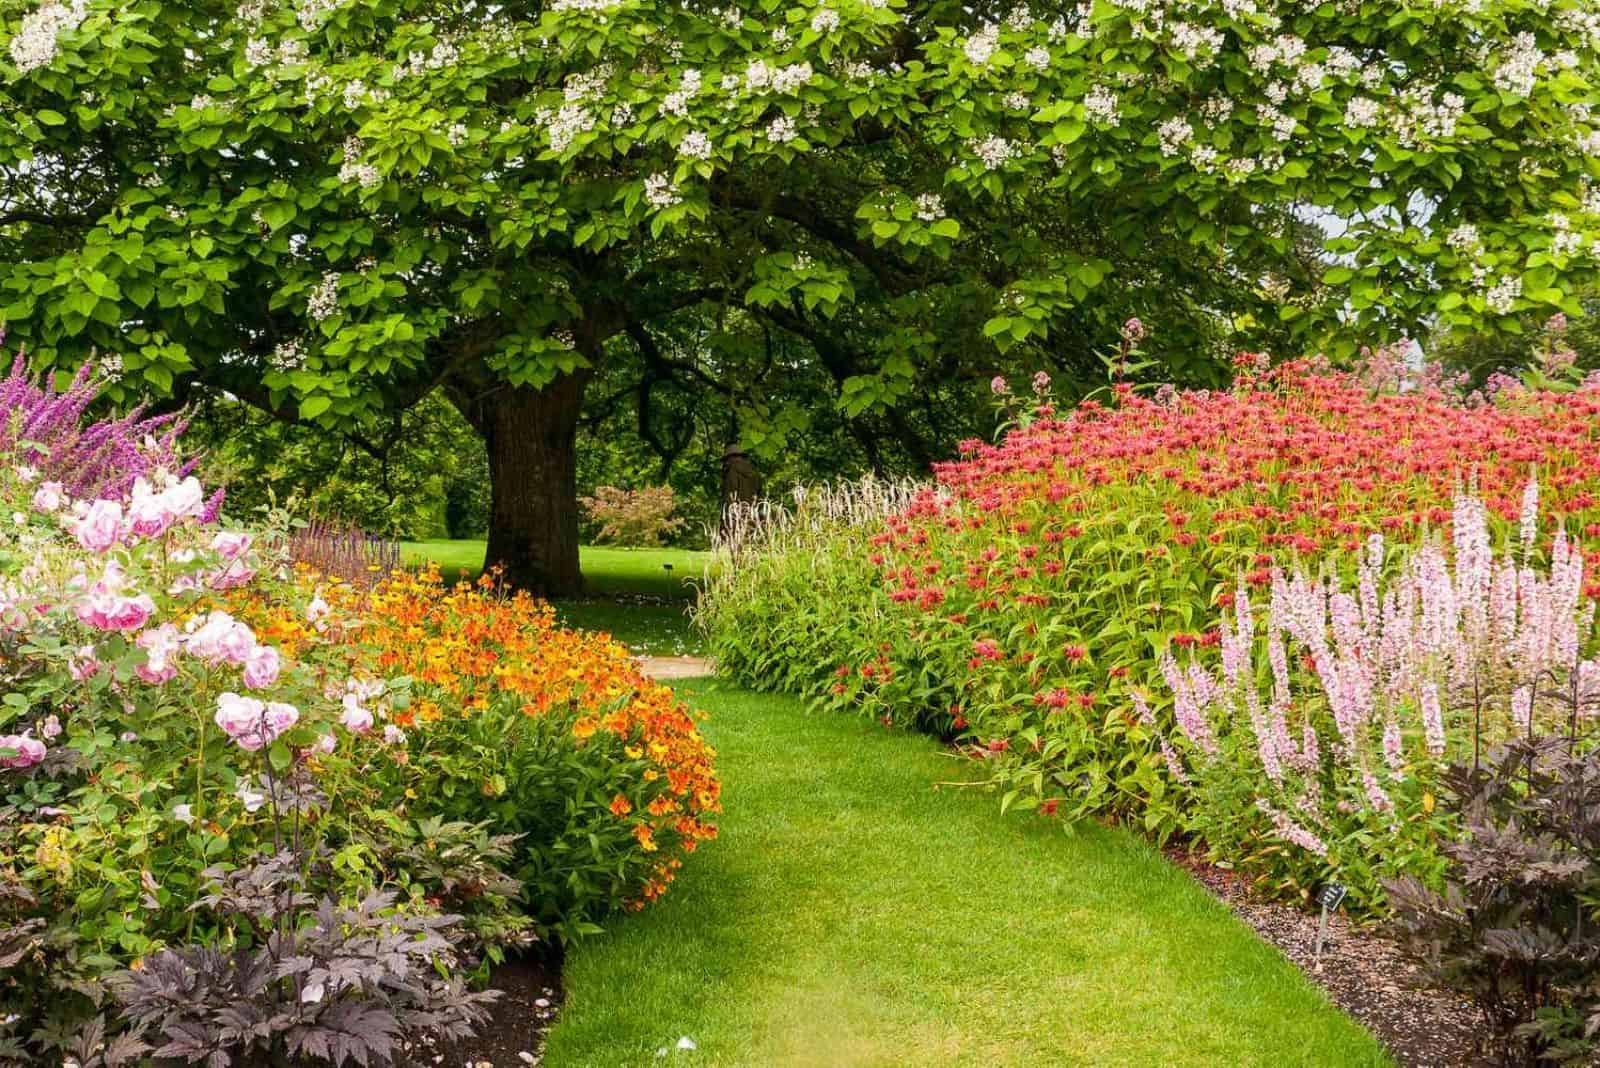 beautiful garden with flowers and trees